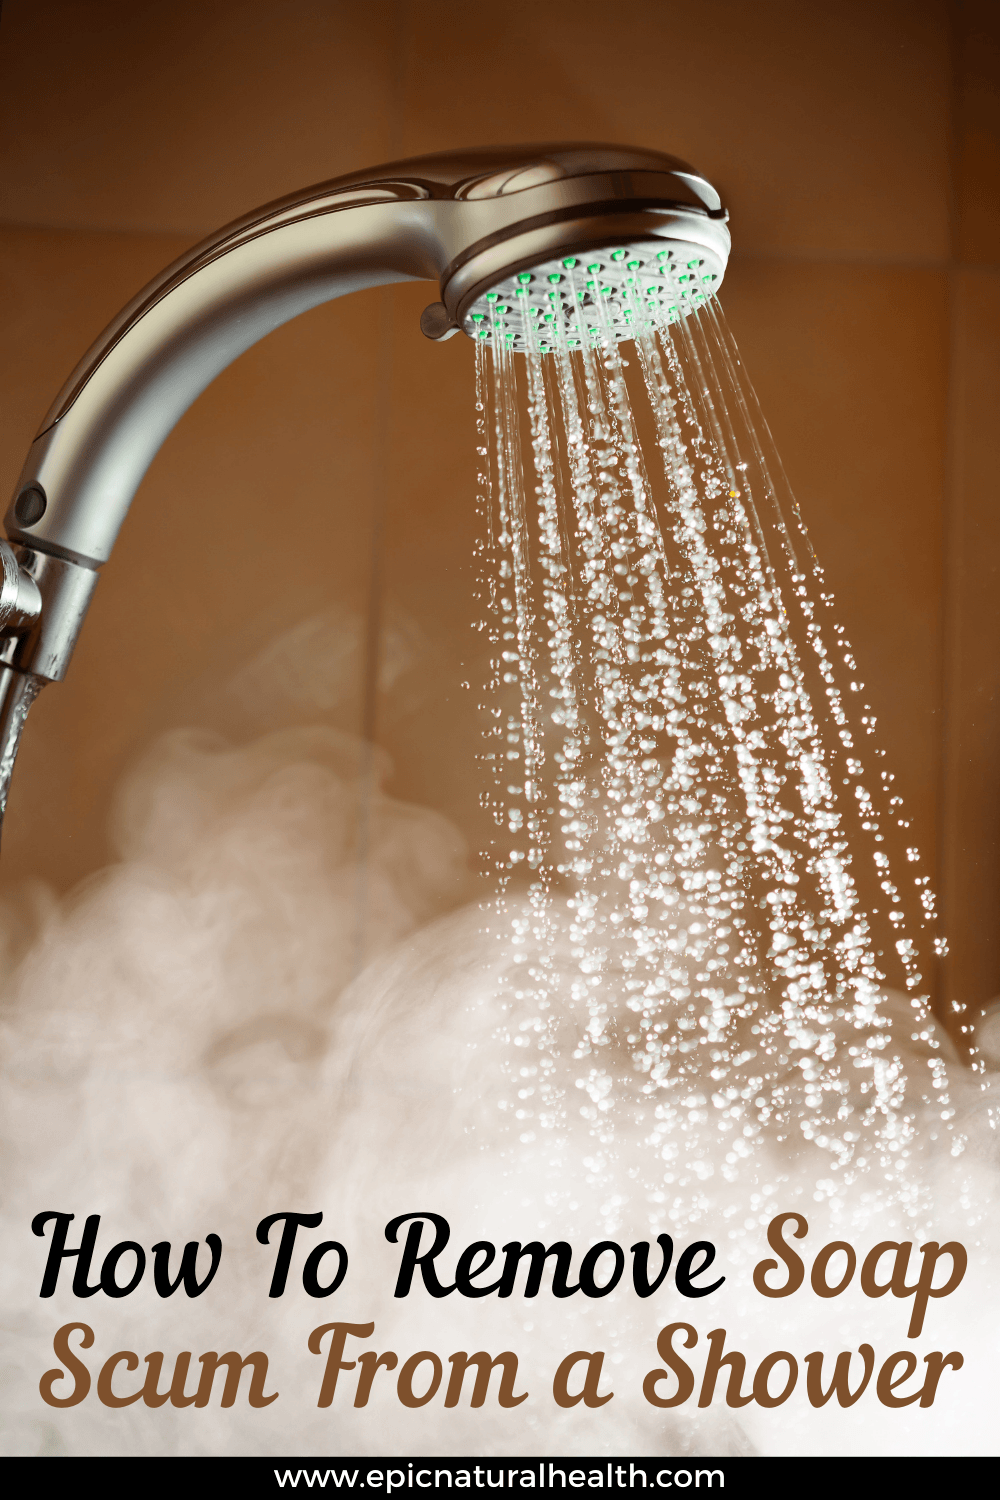 How to Remove Soap Scum From a Shower